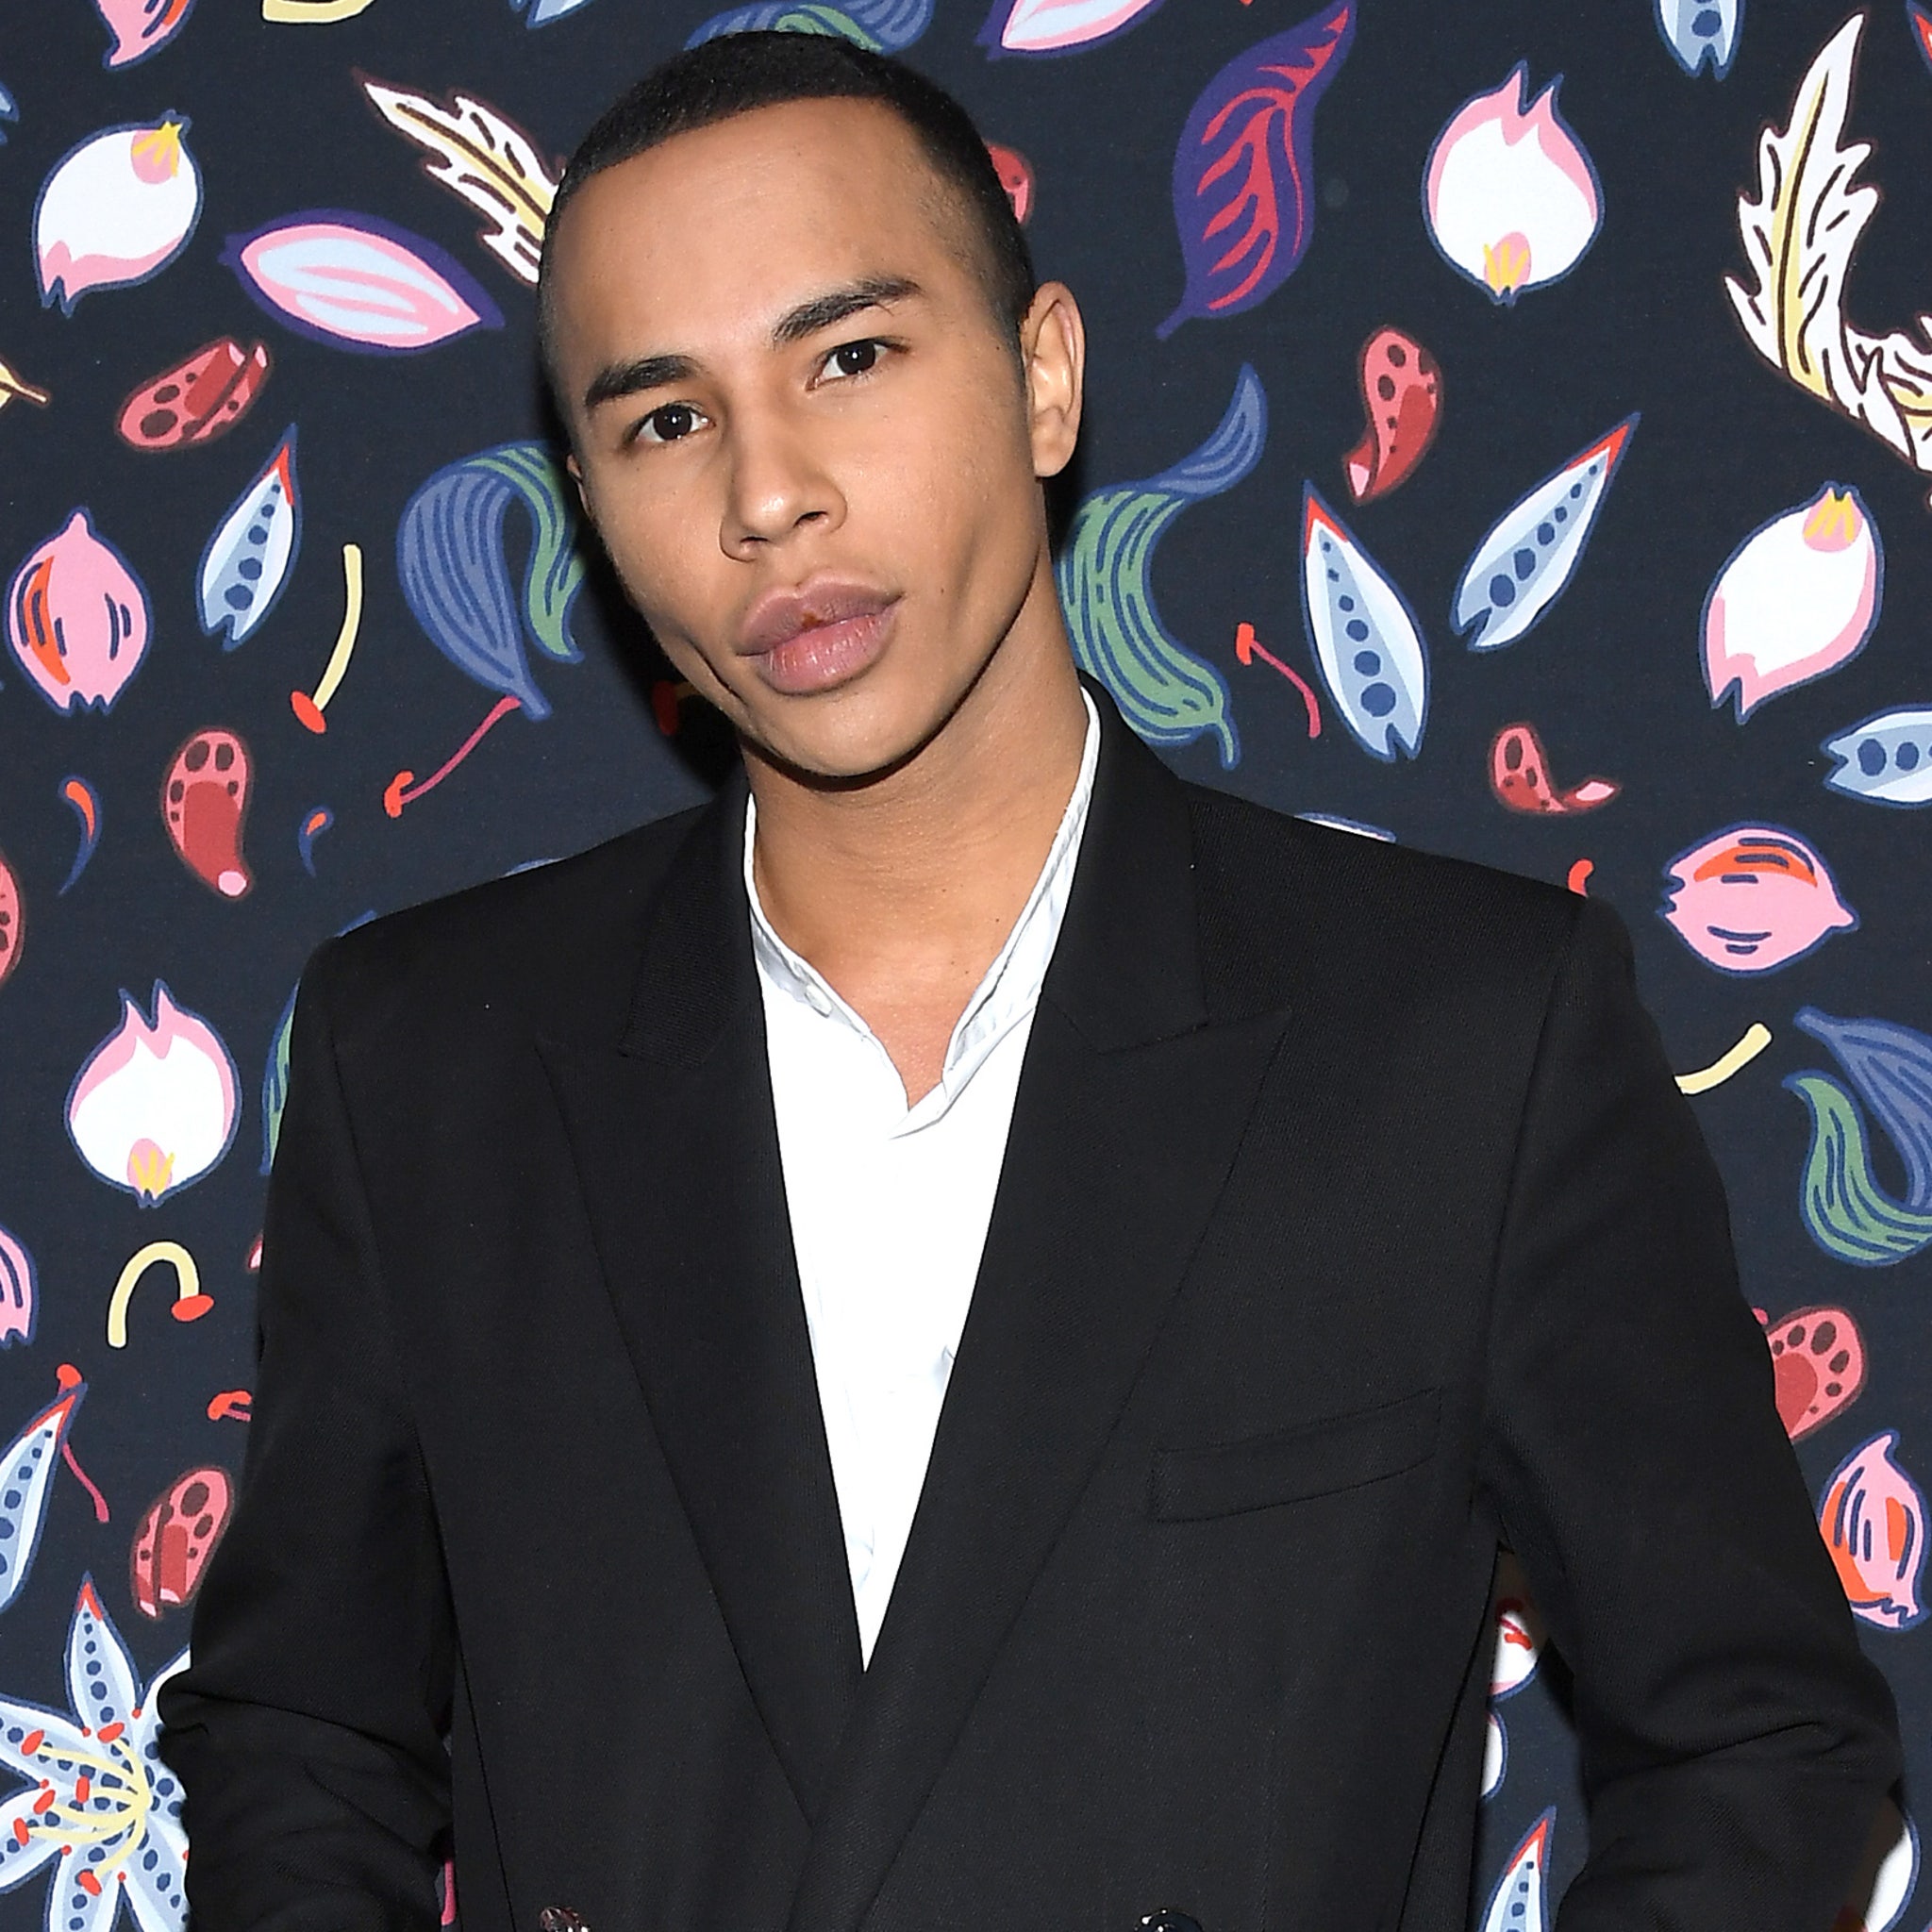 Olivier Rousteing shares details of fireplace explosion, says it inspired  his work at Balmain